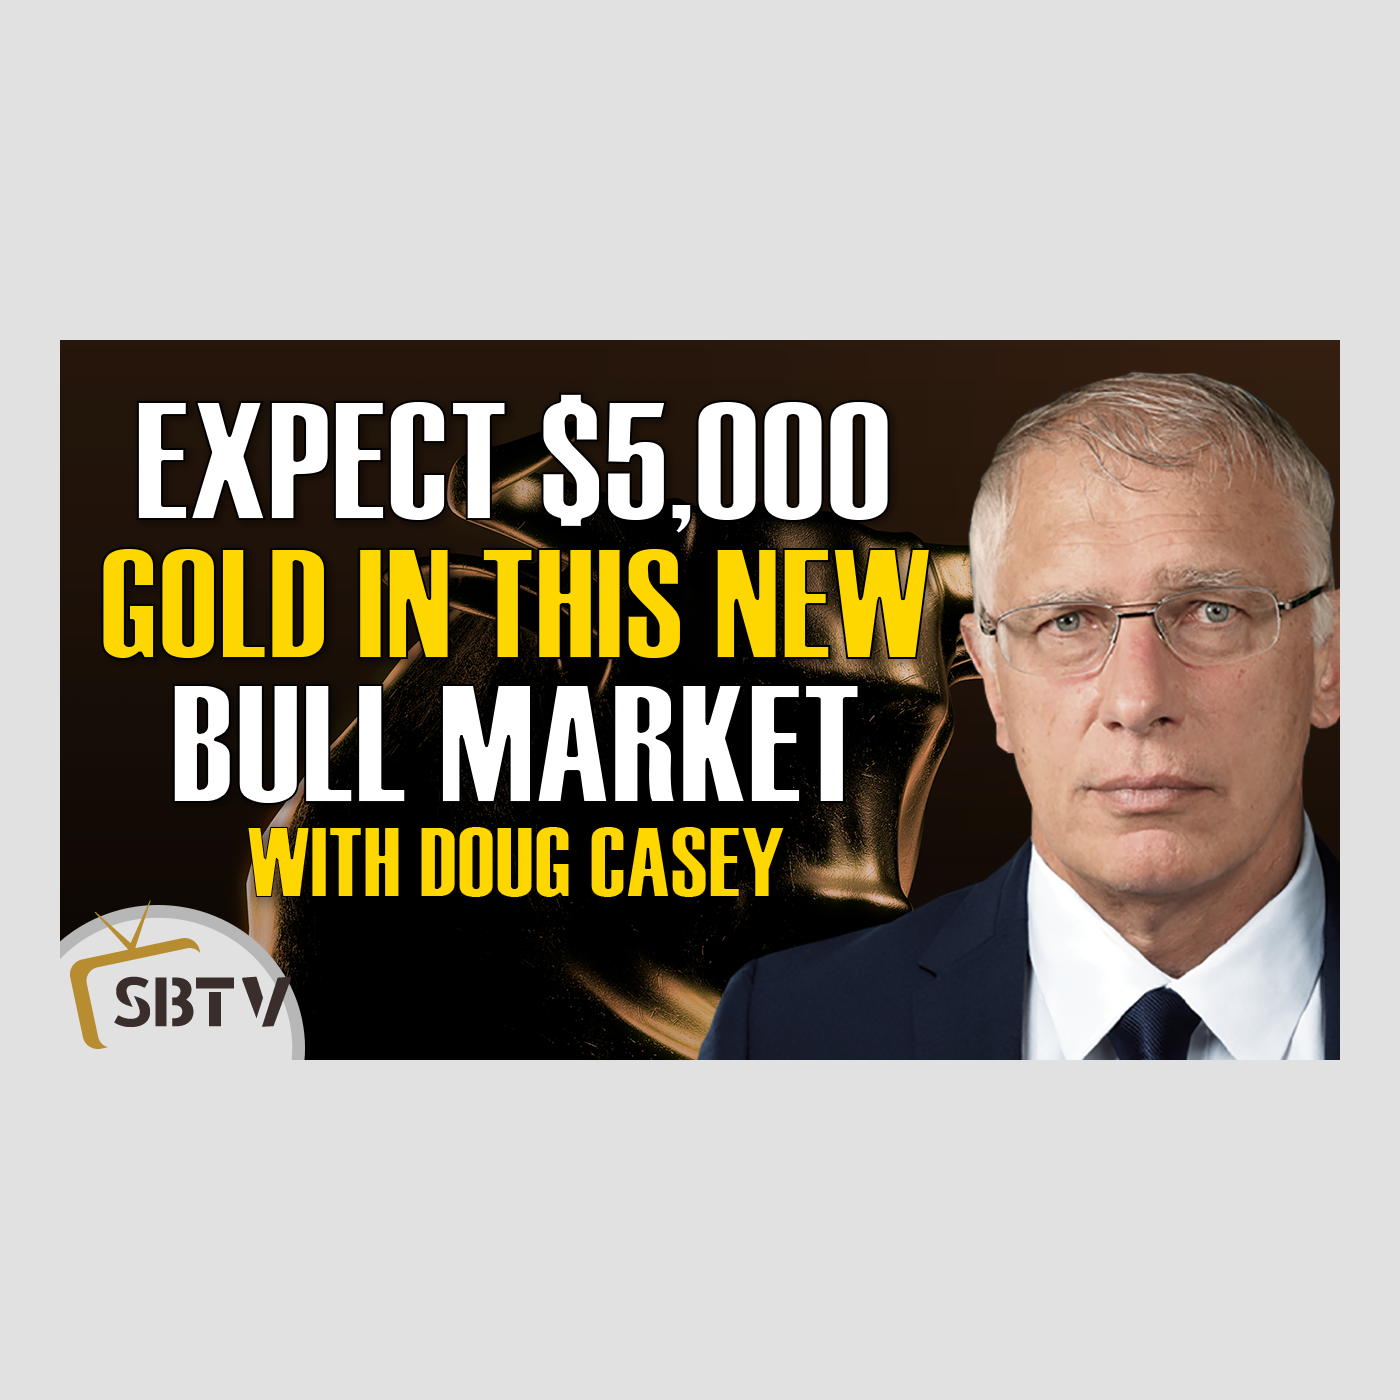 77 Doug Casey - Expect At Least $5000 Gold In This New Spectacular Bull Market